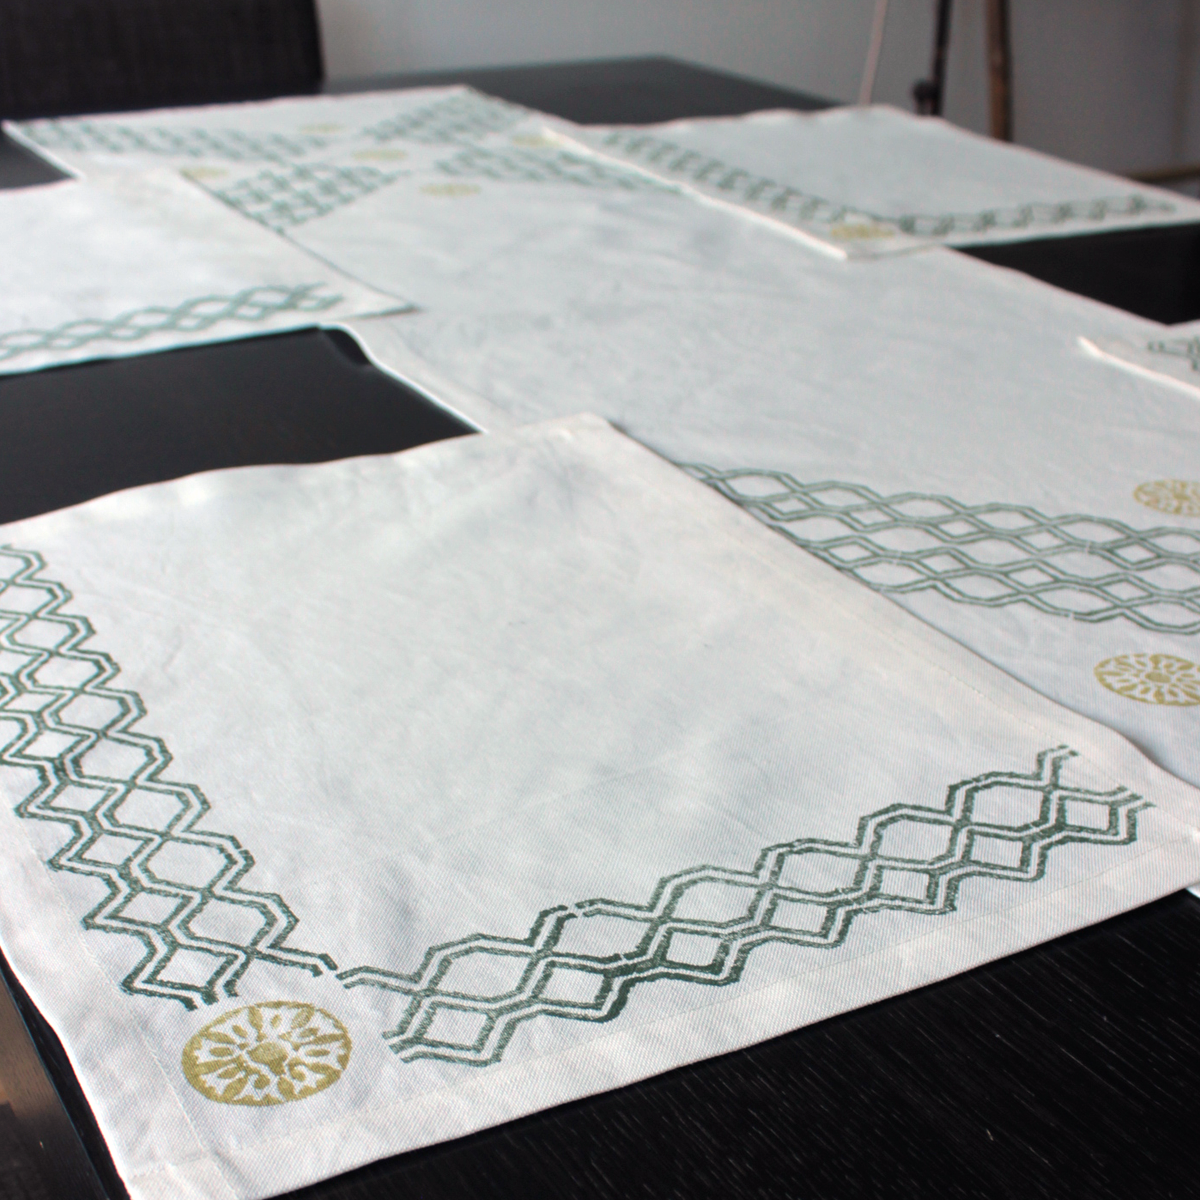 Country Chic: Linen Block Print Placemats and Runner for Table Decor